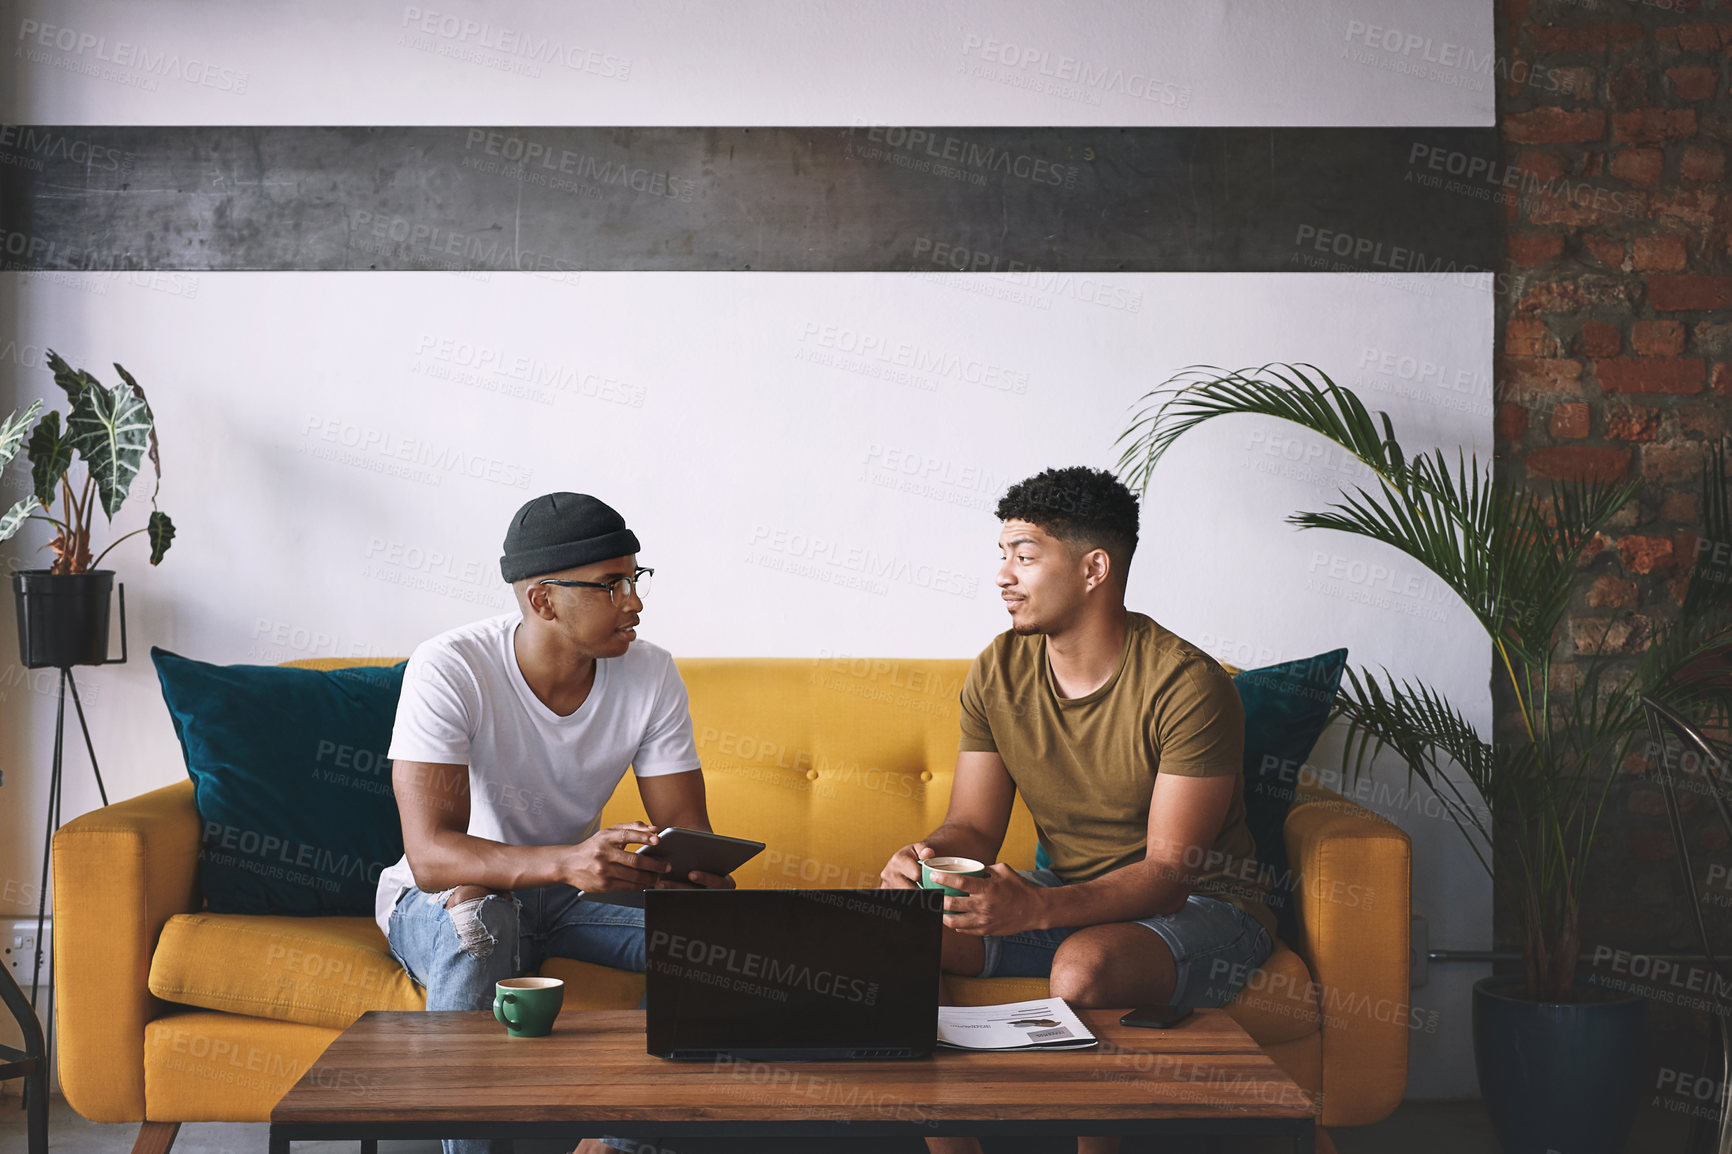 Buy stock photo Shot of two men using a laptop and a digital tablet while having coffee together